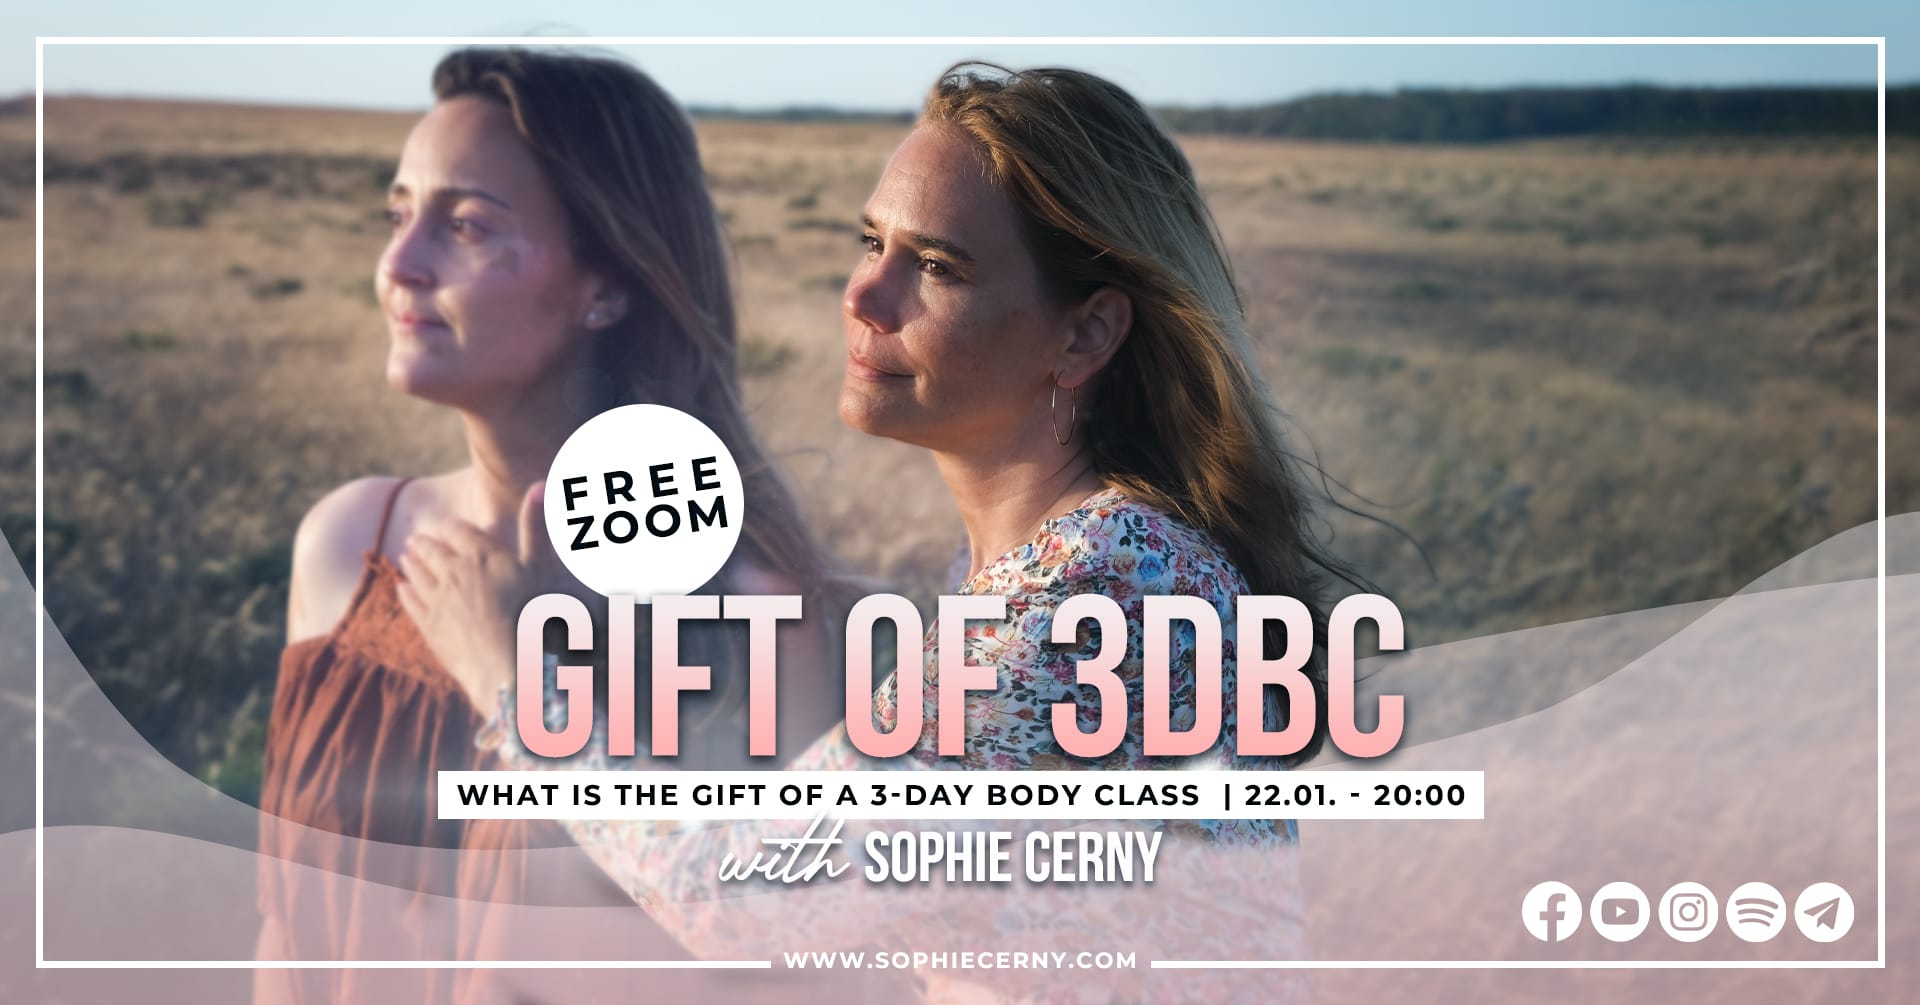 Gift of 3dbc - Sophie cerny